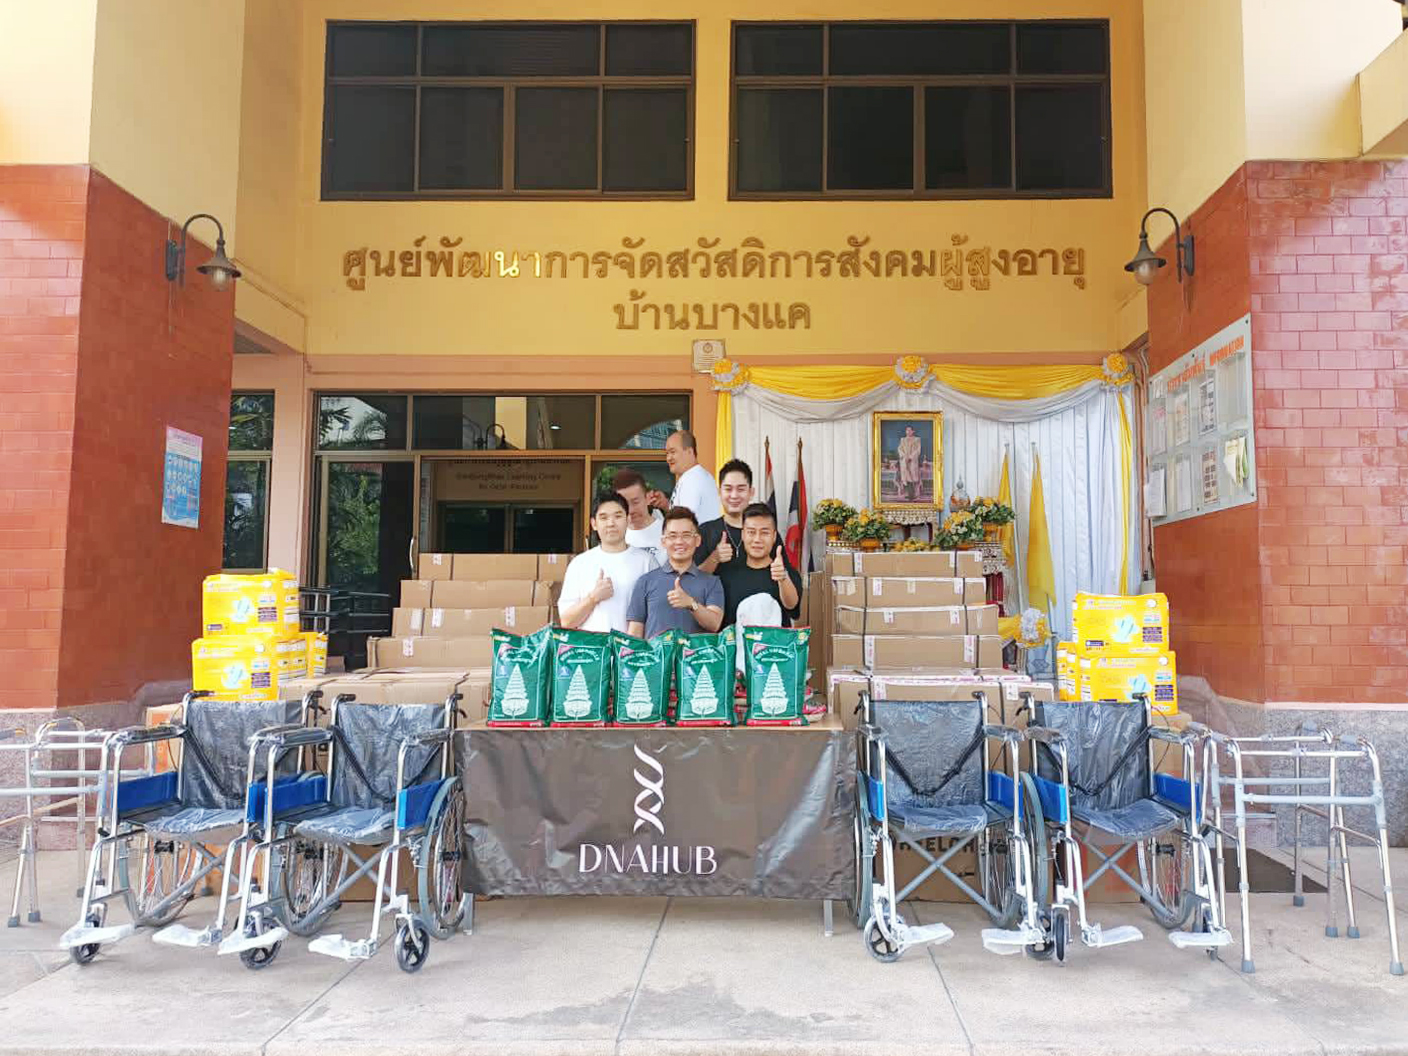 [CSR] DNAHUB Donates RM10,000 to Support Vulnerable Groups in Thailand